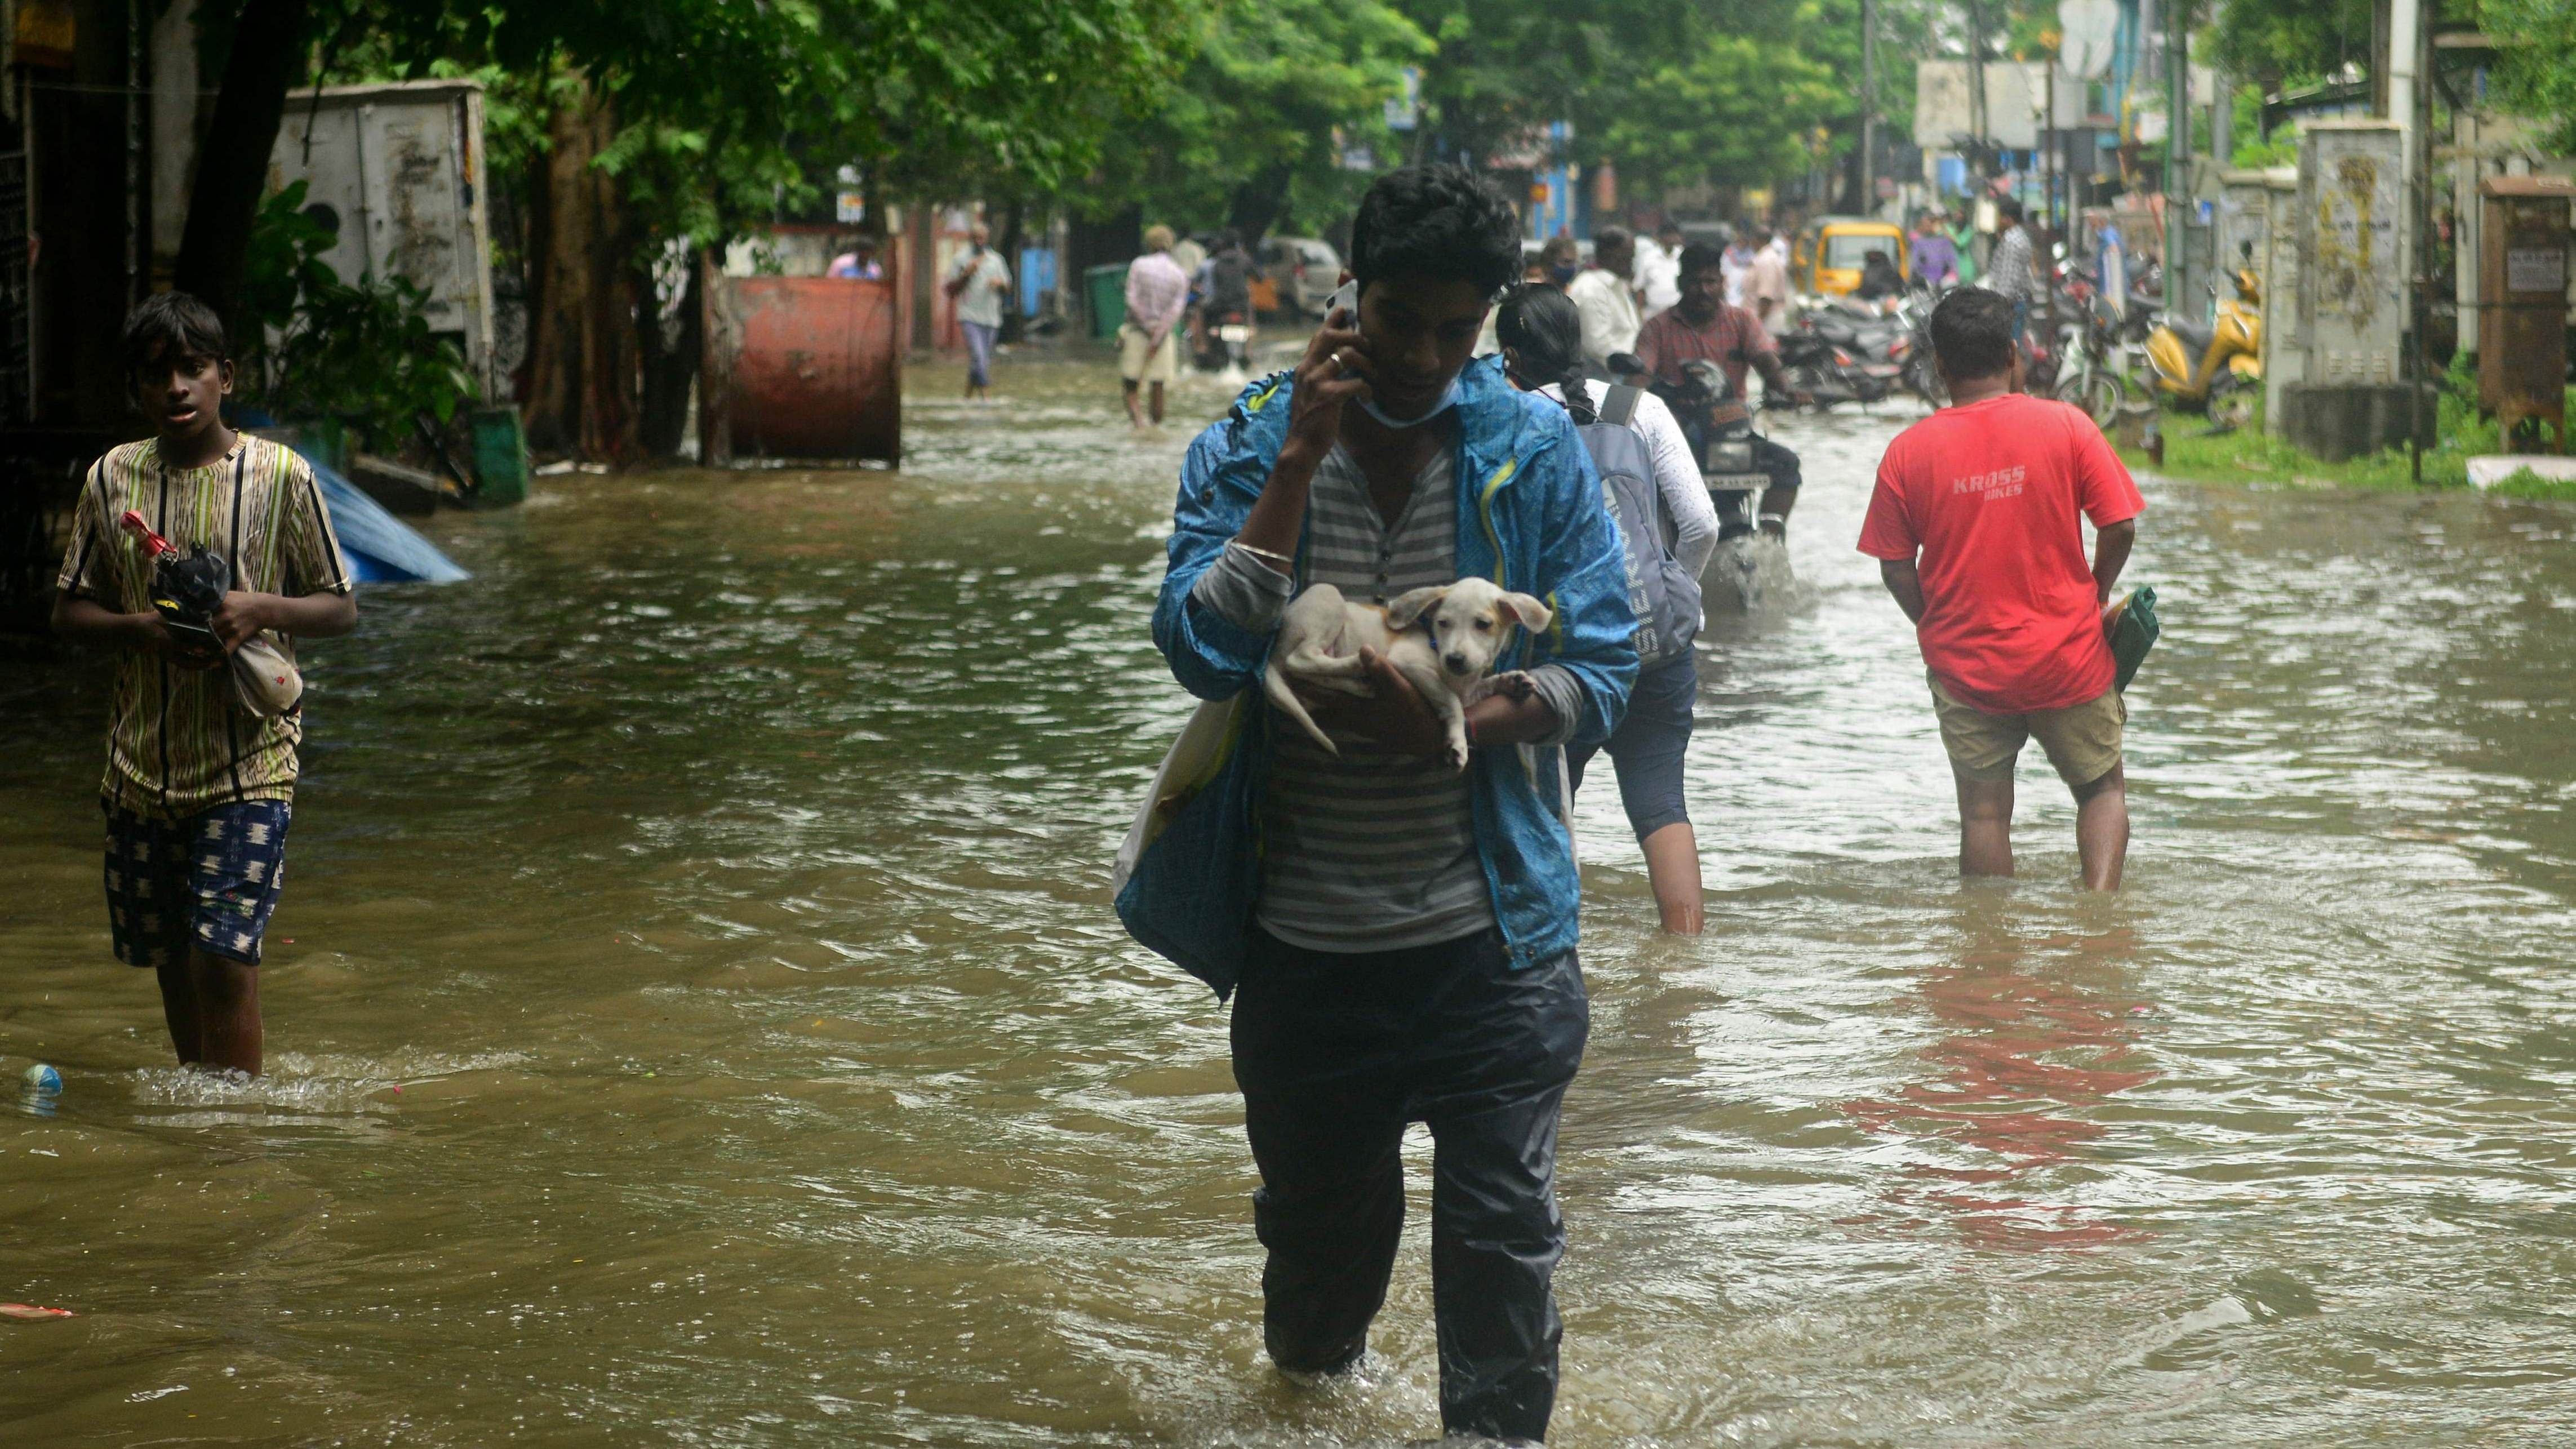 A man carries a puppy as he wades through a flooded street after a heavy rain shower in Chennai. Credit: AFP Photo